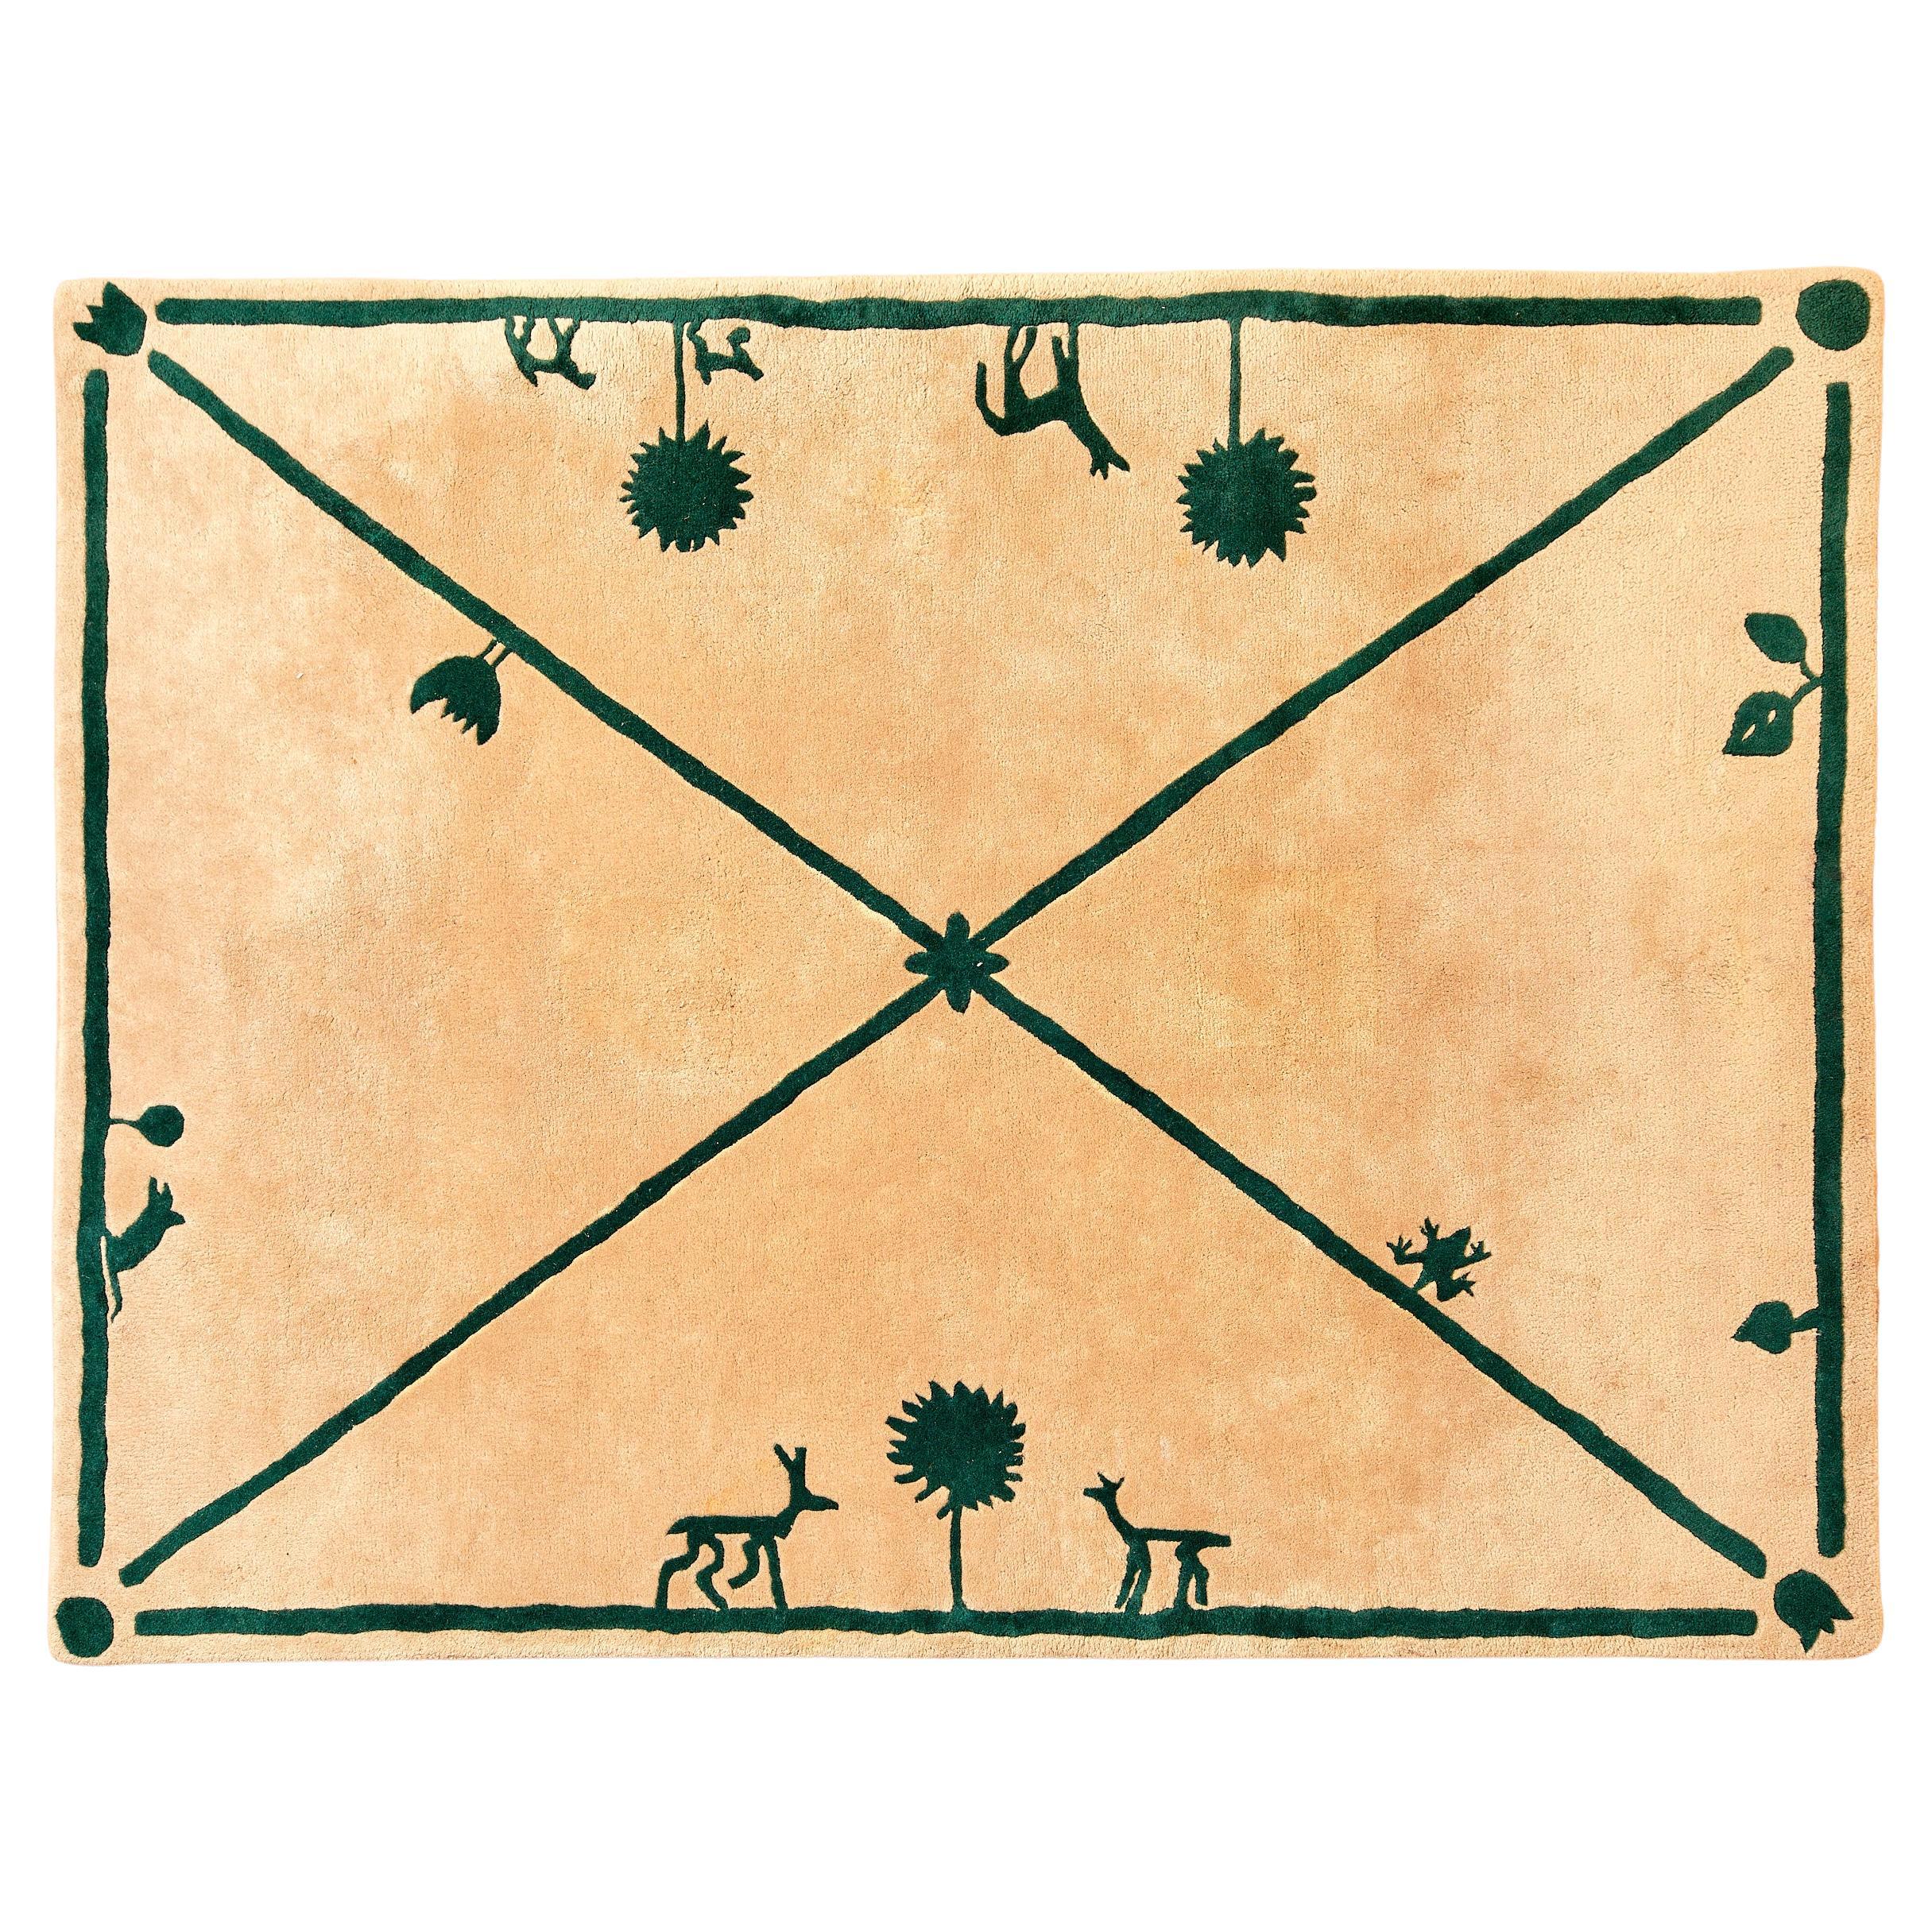 Diego Giacometti (1905)1985), La Promenade ses Amis carpet,  numbered 87/ A-100. For Sale